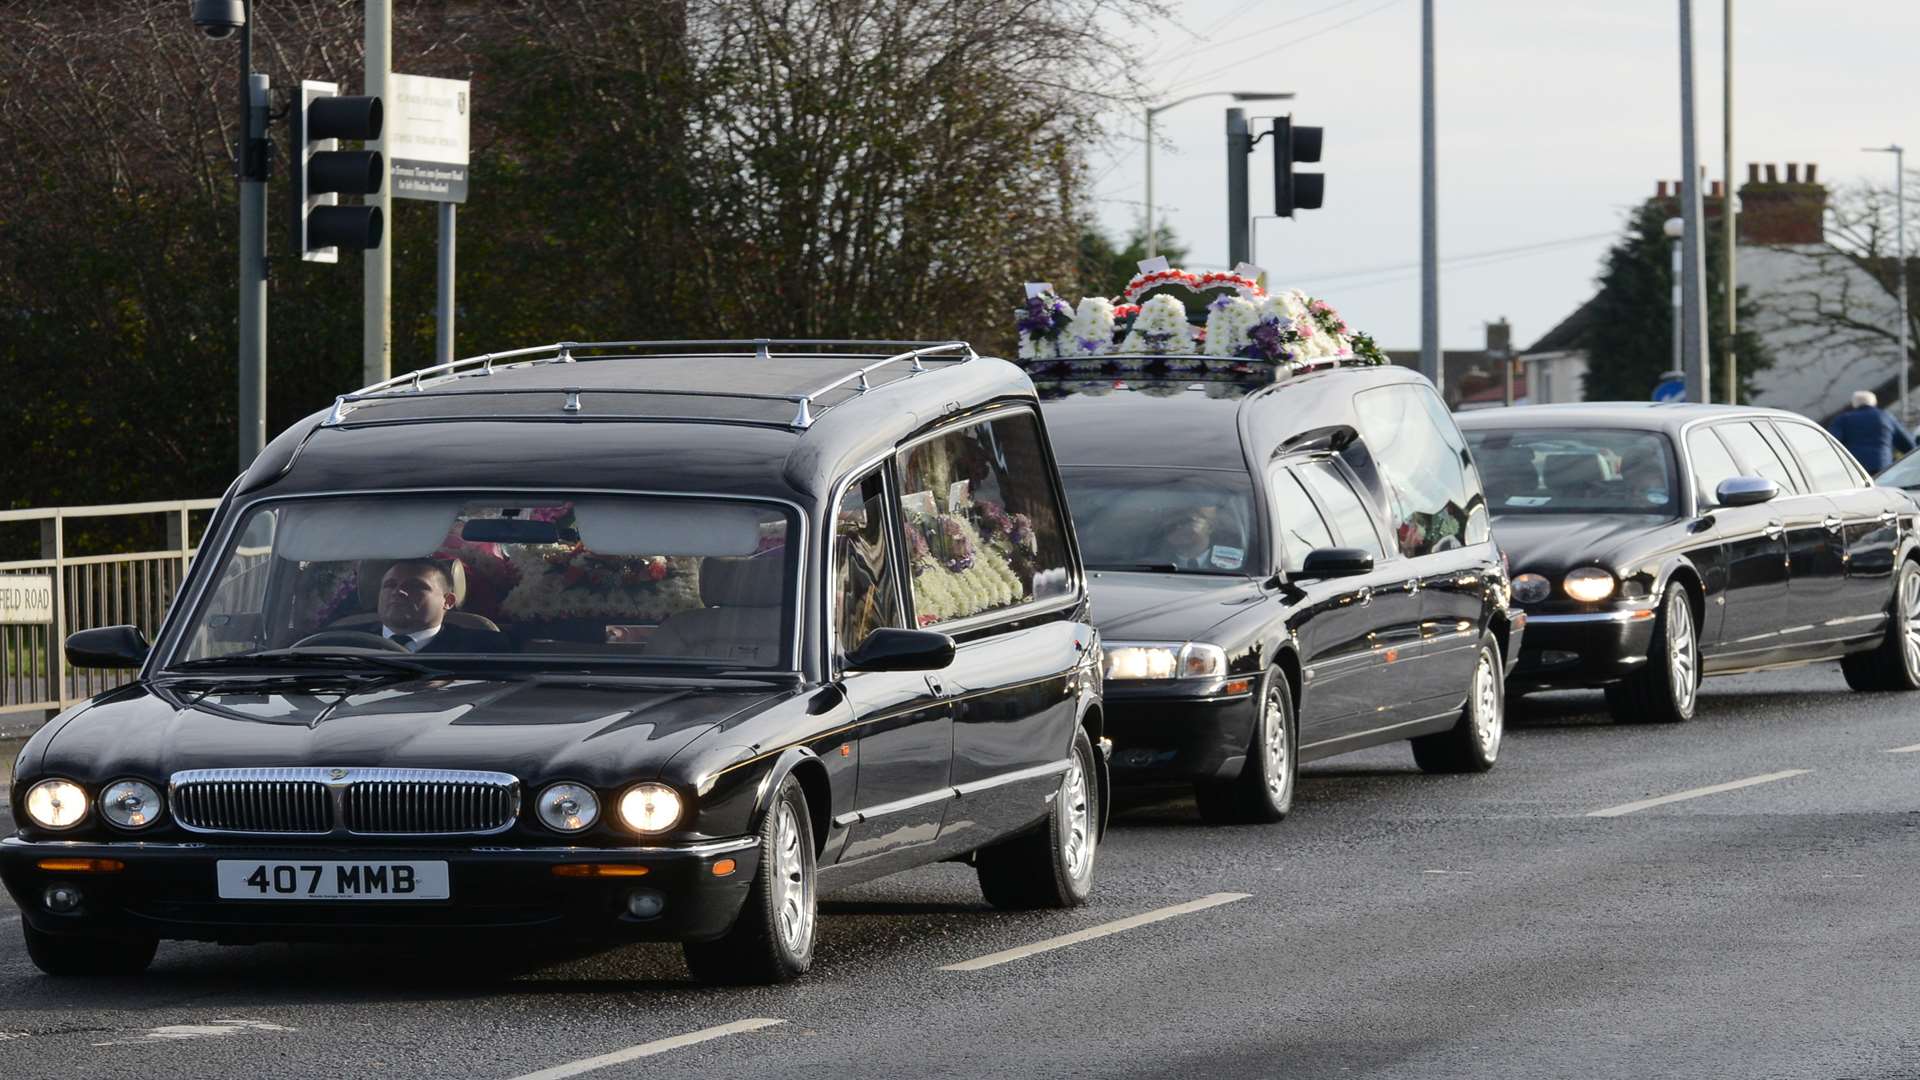 A procession of 12 limos and one funeral car headed to the church